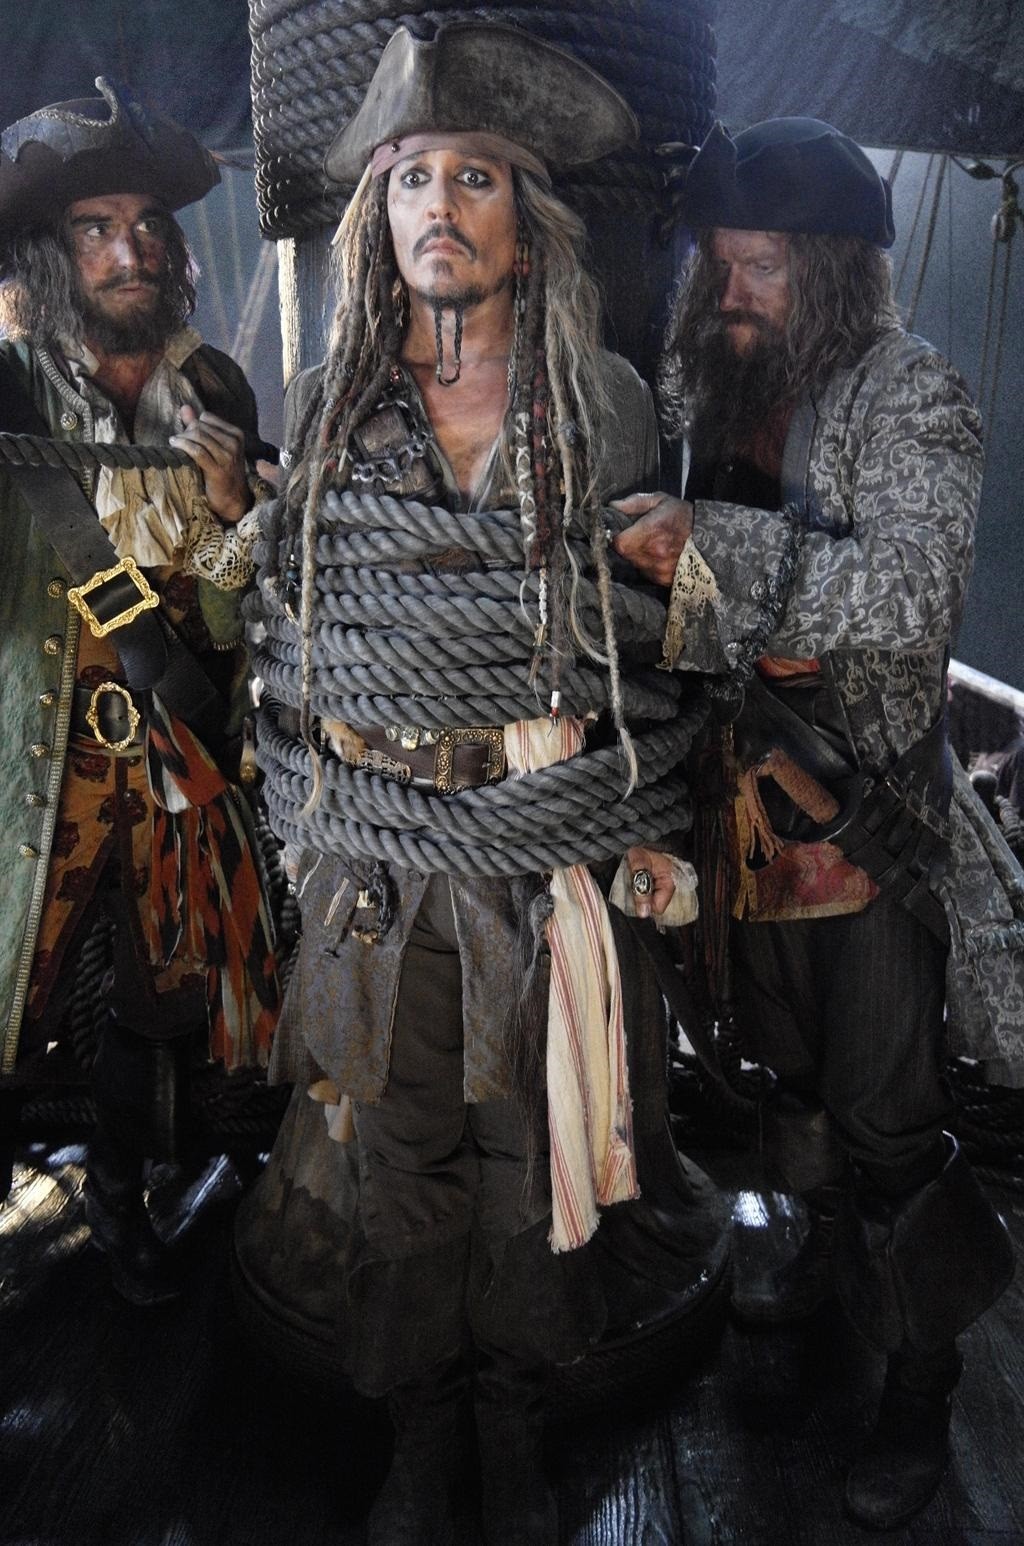 Johnny Depp stars as Captain Jack Sparrow in Walt Disney Pictures' Pirates of the Caribbean: Dead Men Tell No Tales (2017)